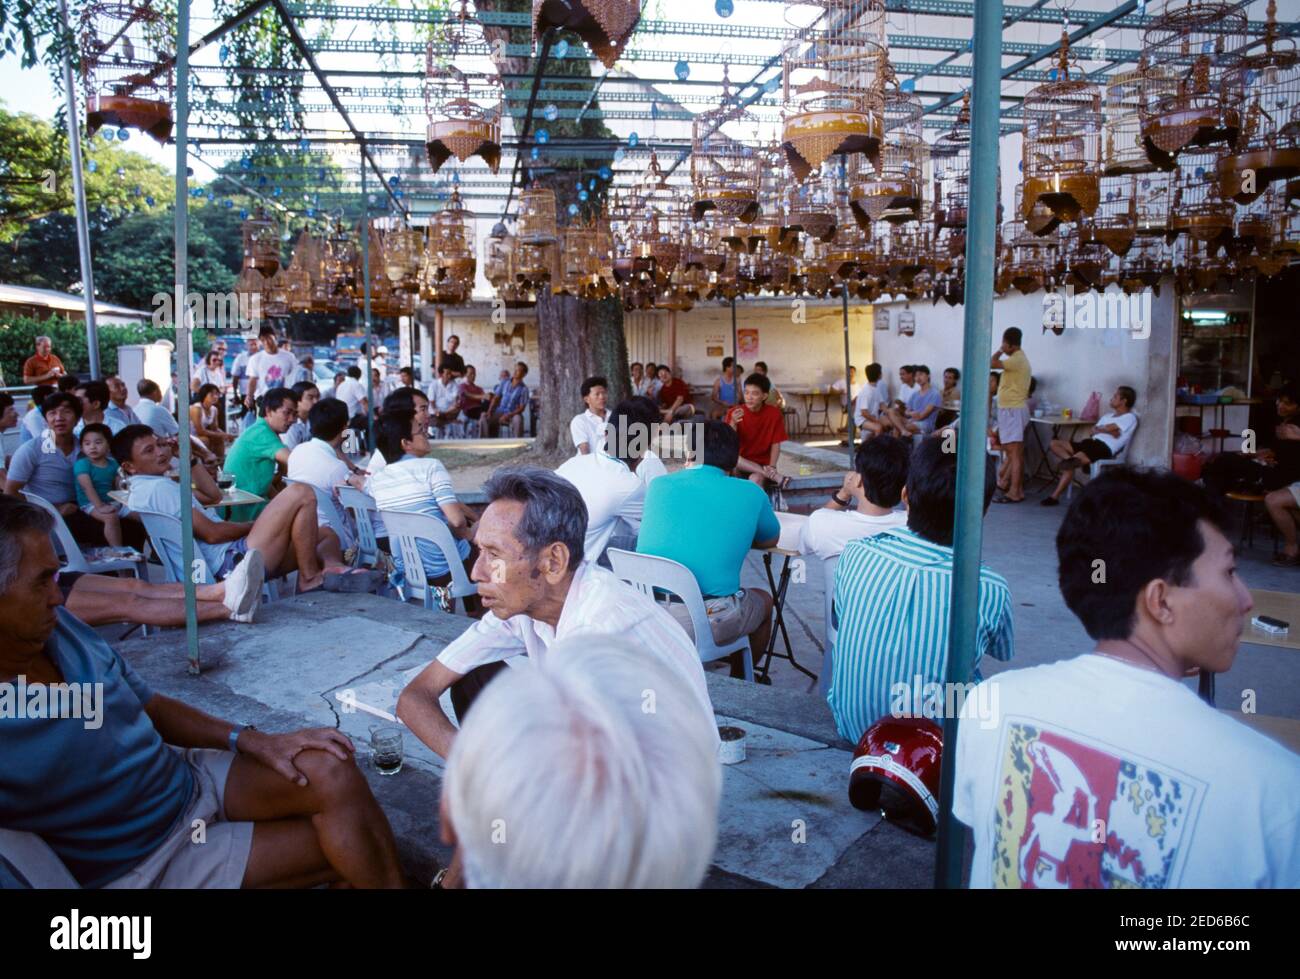 Singapore Sunday Morning People Sitting in Cafe & Birds in Cages Above Heads Stock Photo